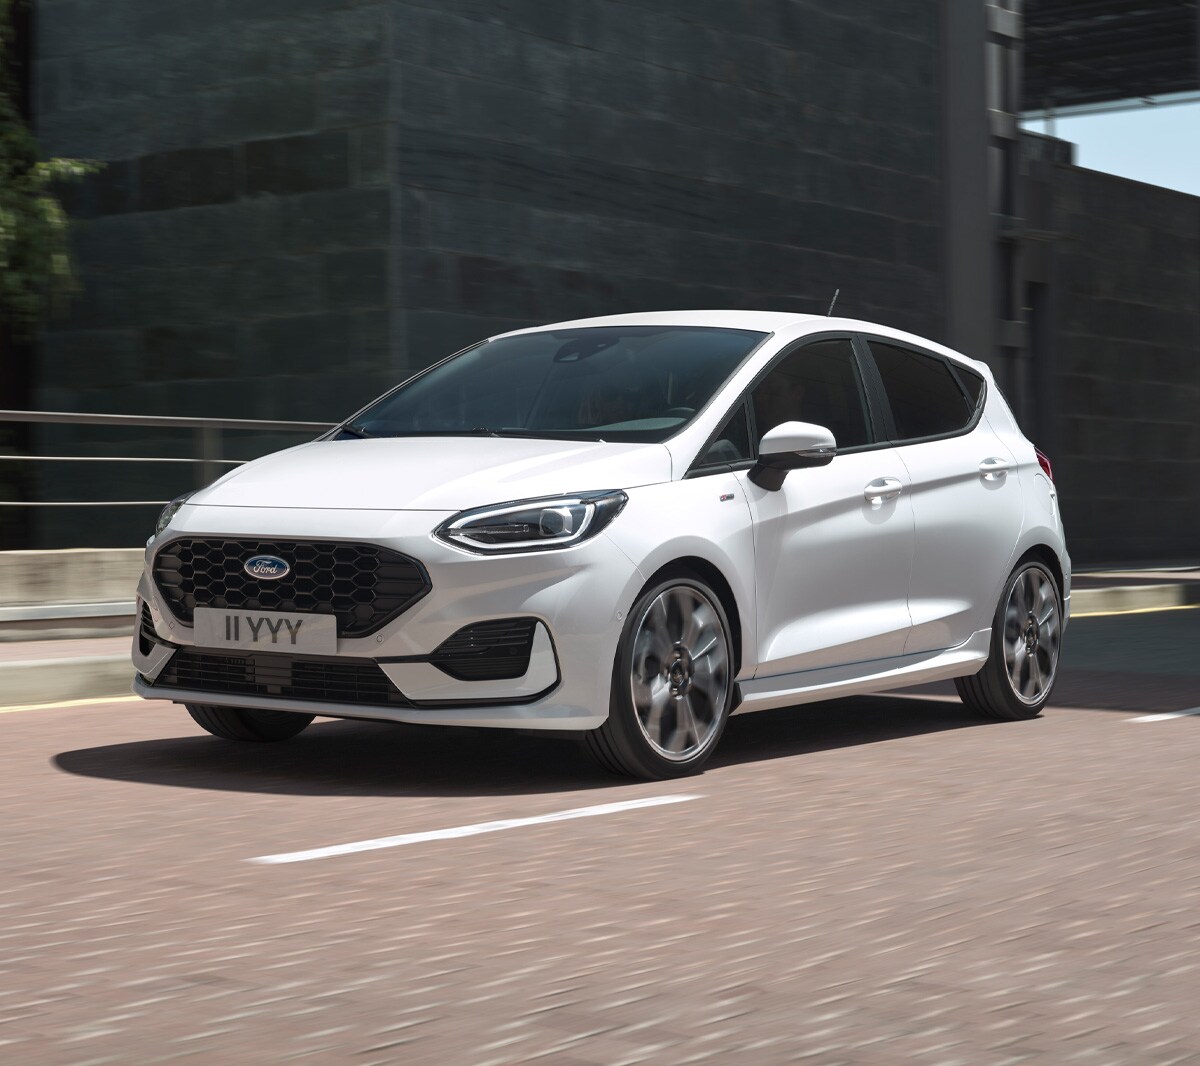 Ford Fiesta front view